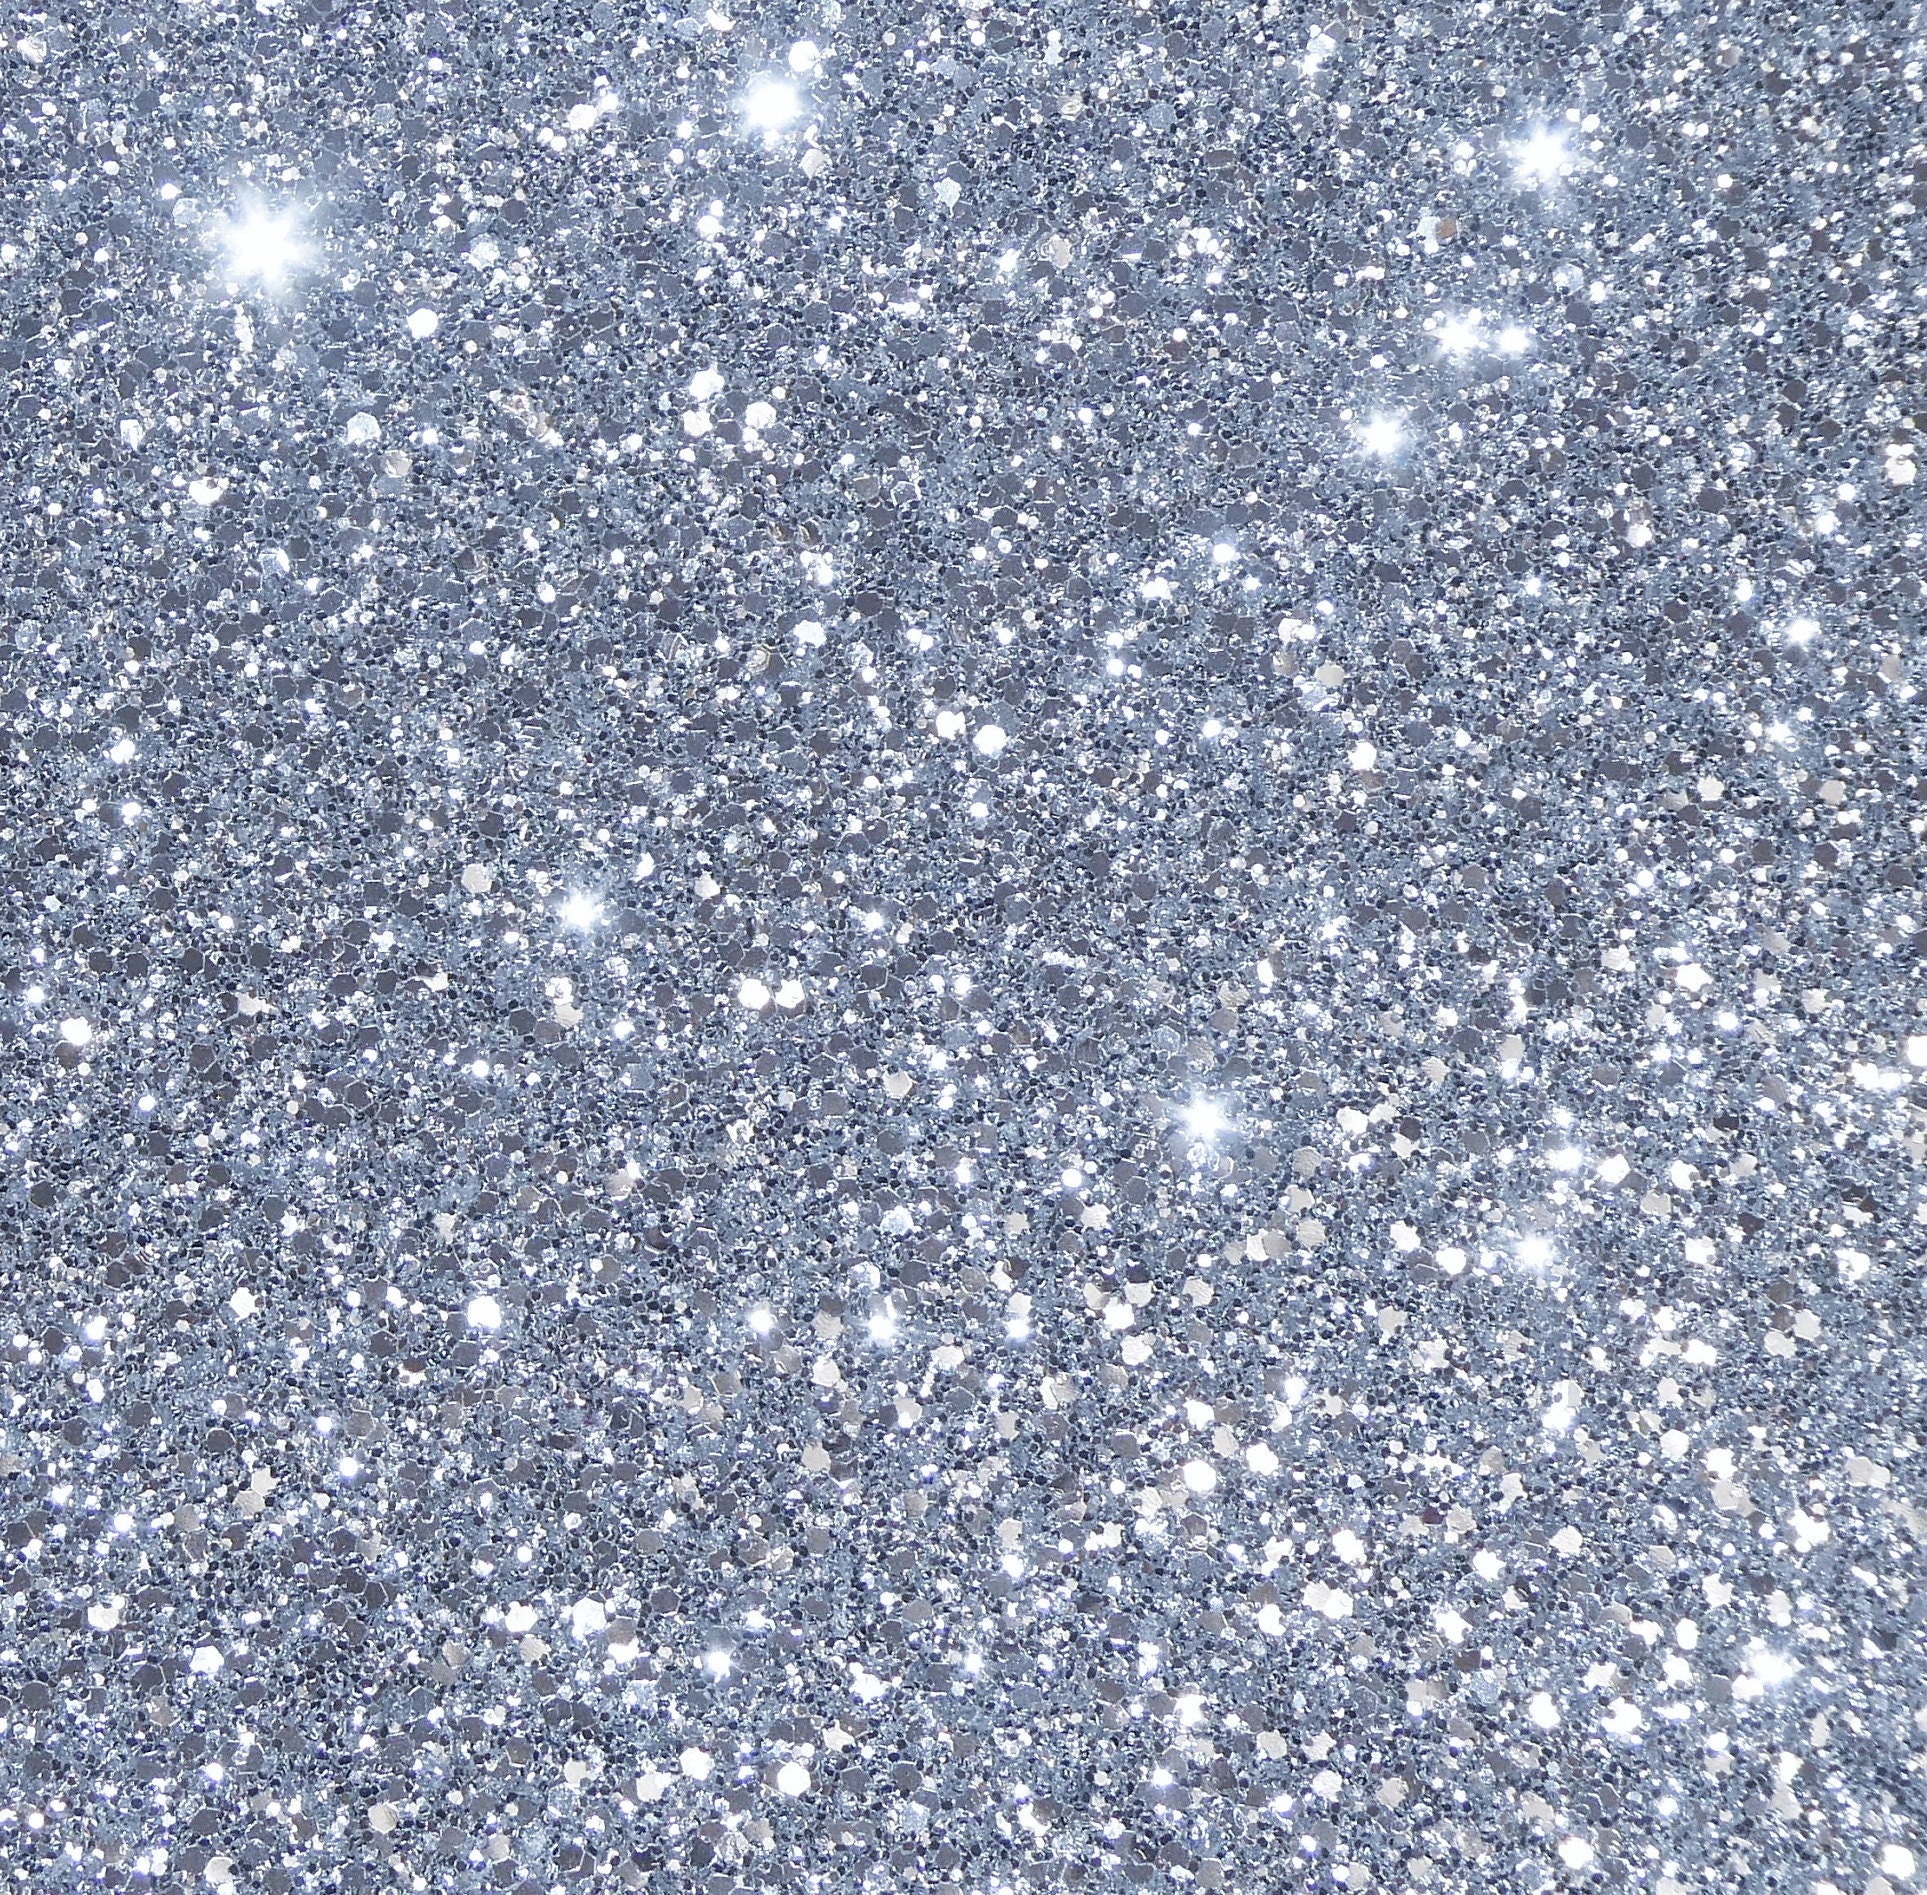 Chunky Glitter 12x12 True Silver METALLIC applied to Leather Cowhide now  on Black leather back 6.5 oz/2.4 mm PeggySueAlso® E4355-01